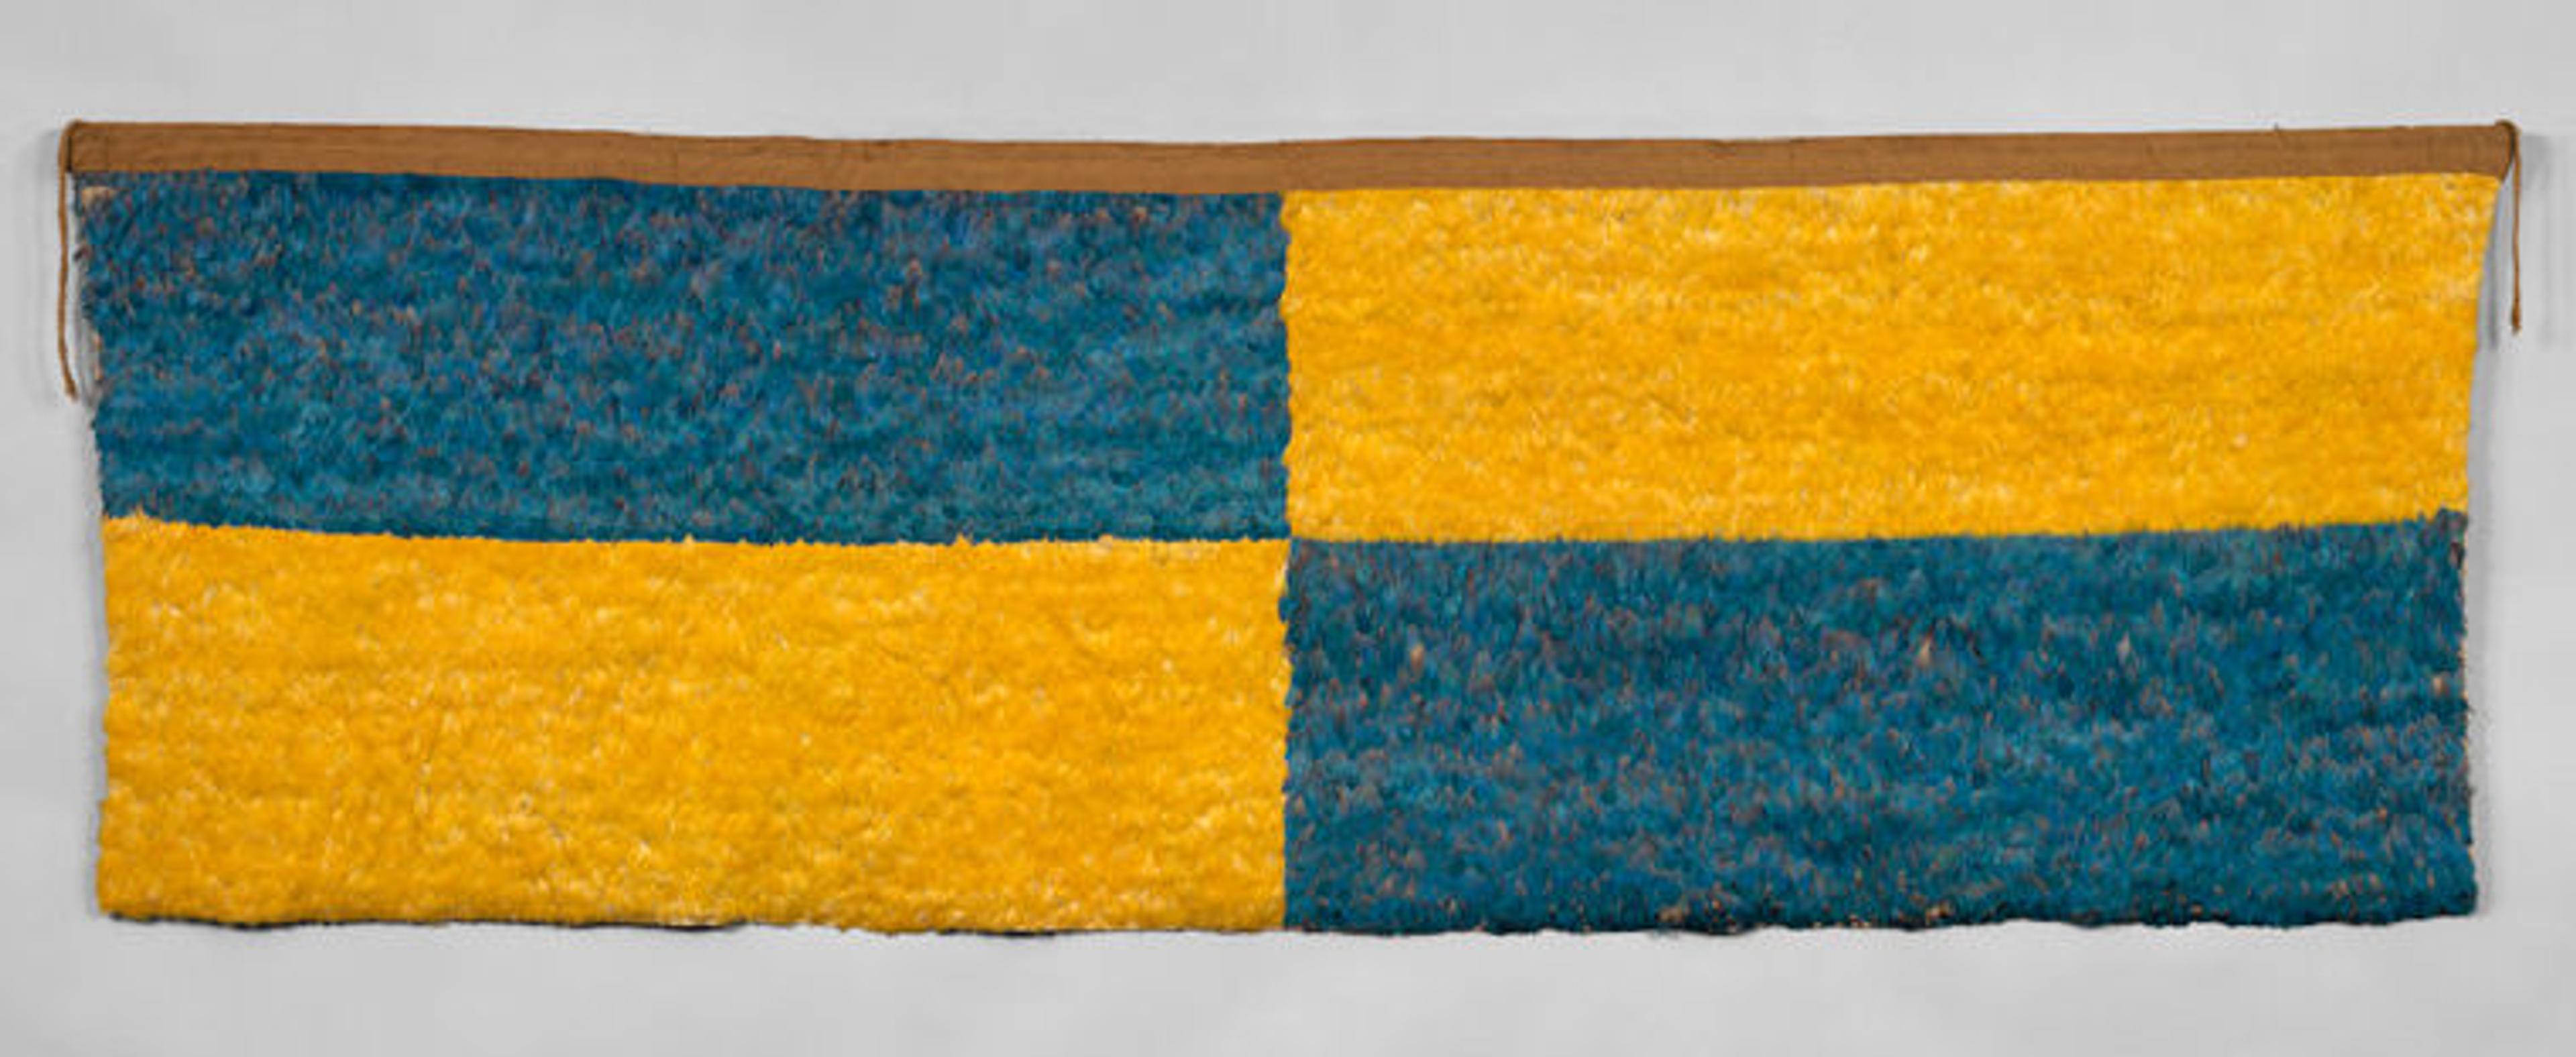 Peruvian featherwork textile made of blue and yellow feathers